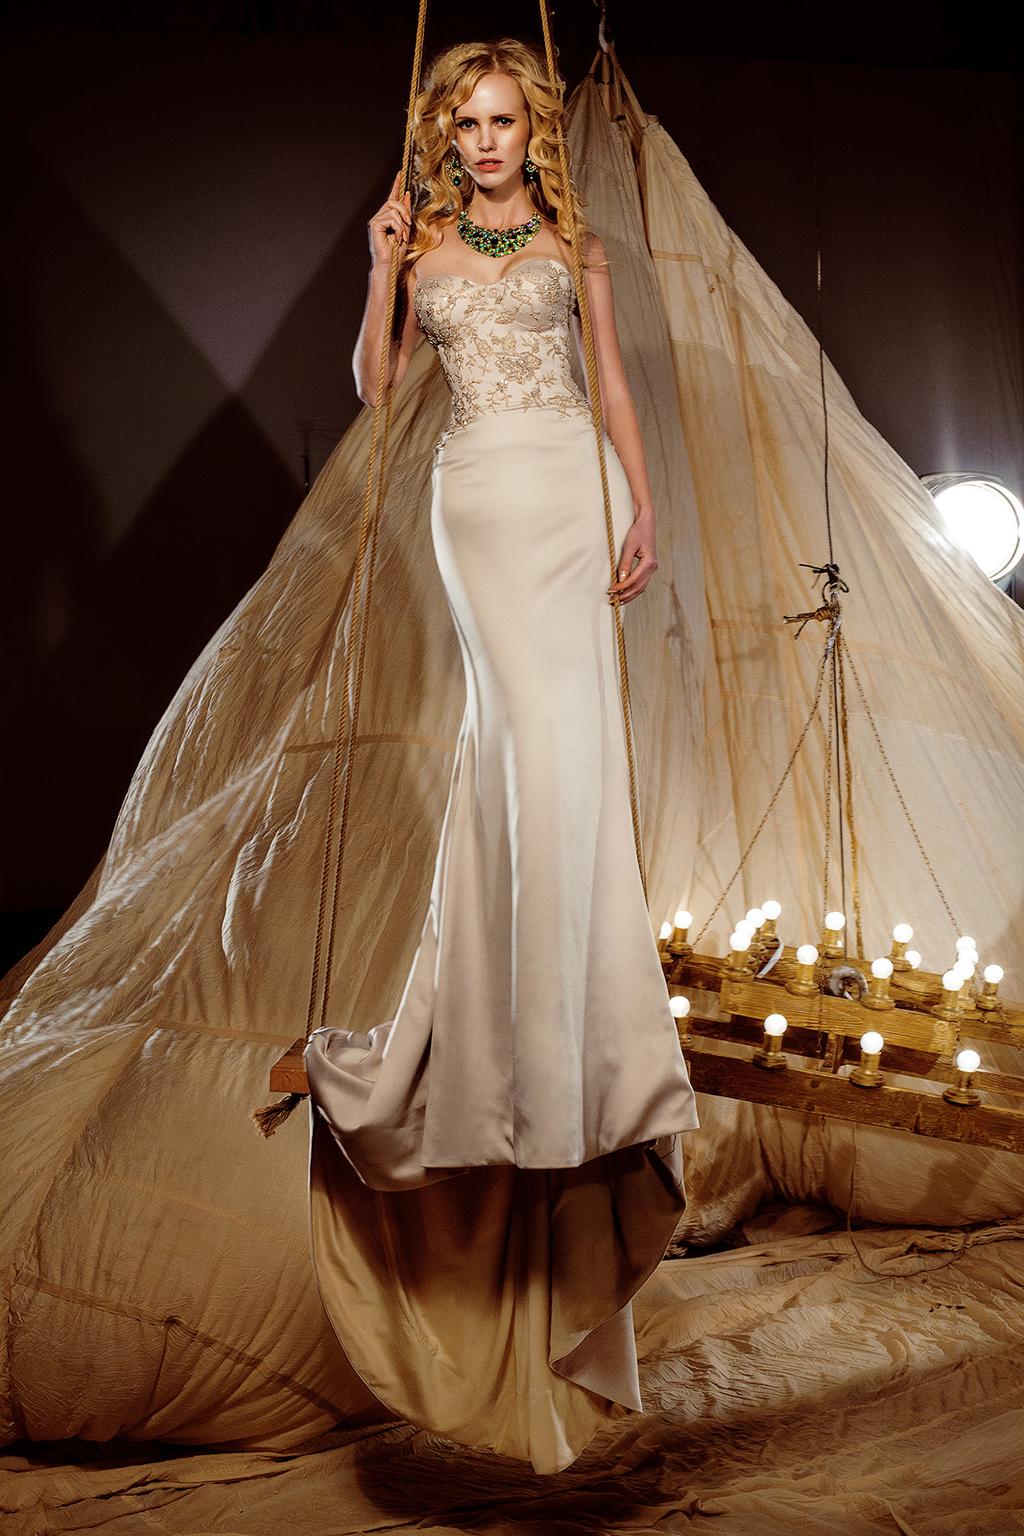 Jesien Wholesale price: $315 Open light fitting dress, made of thin satin in the cappuccino color